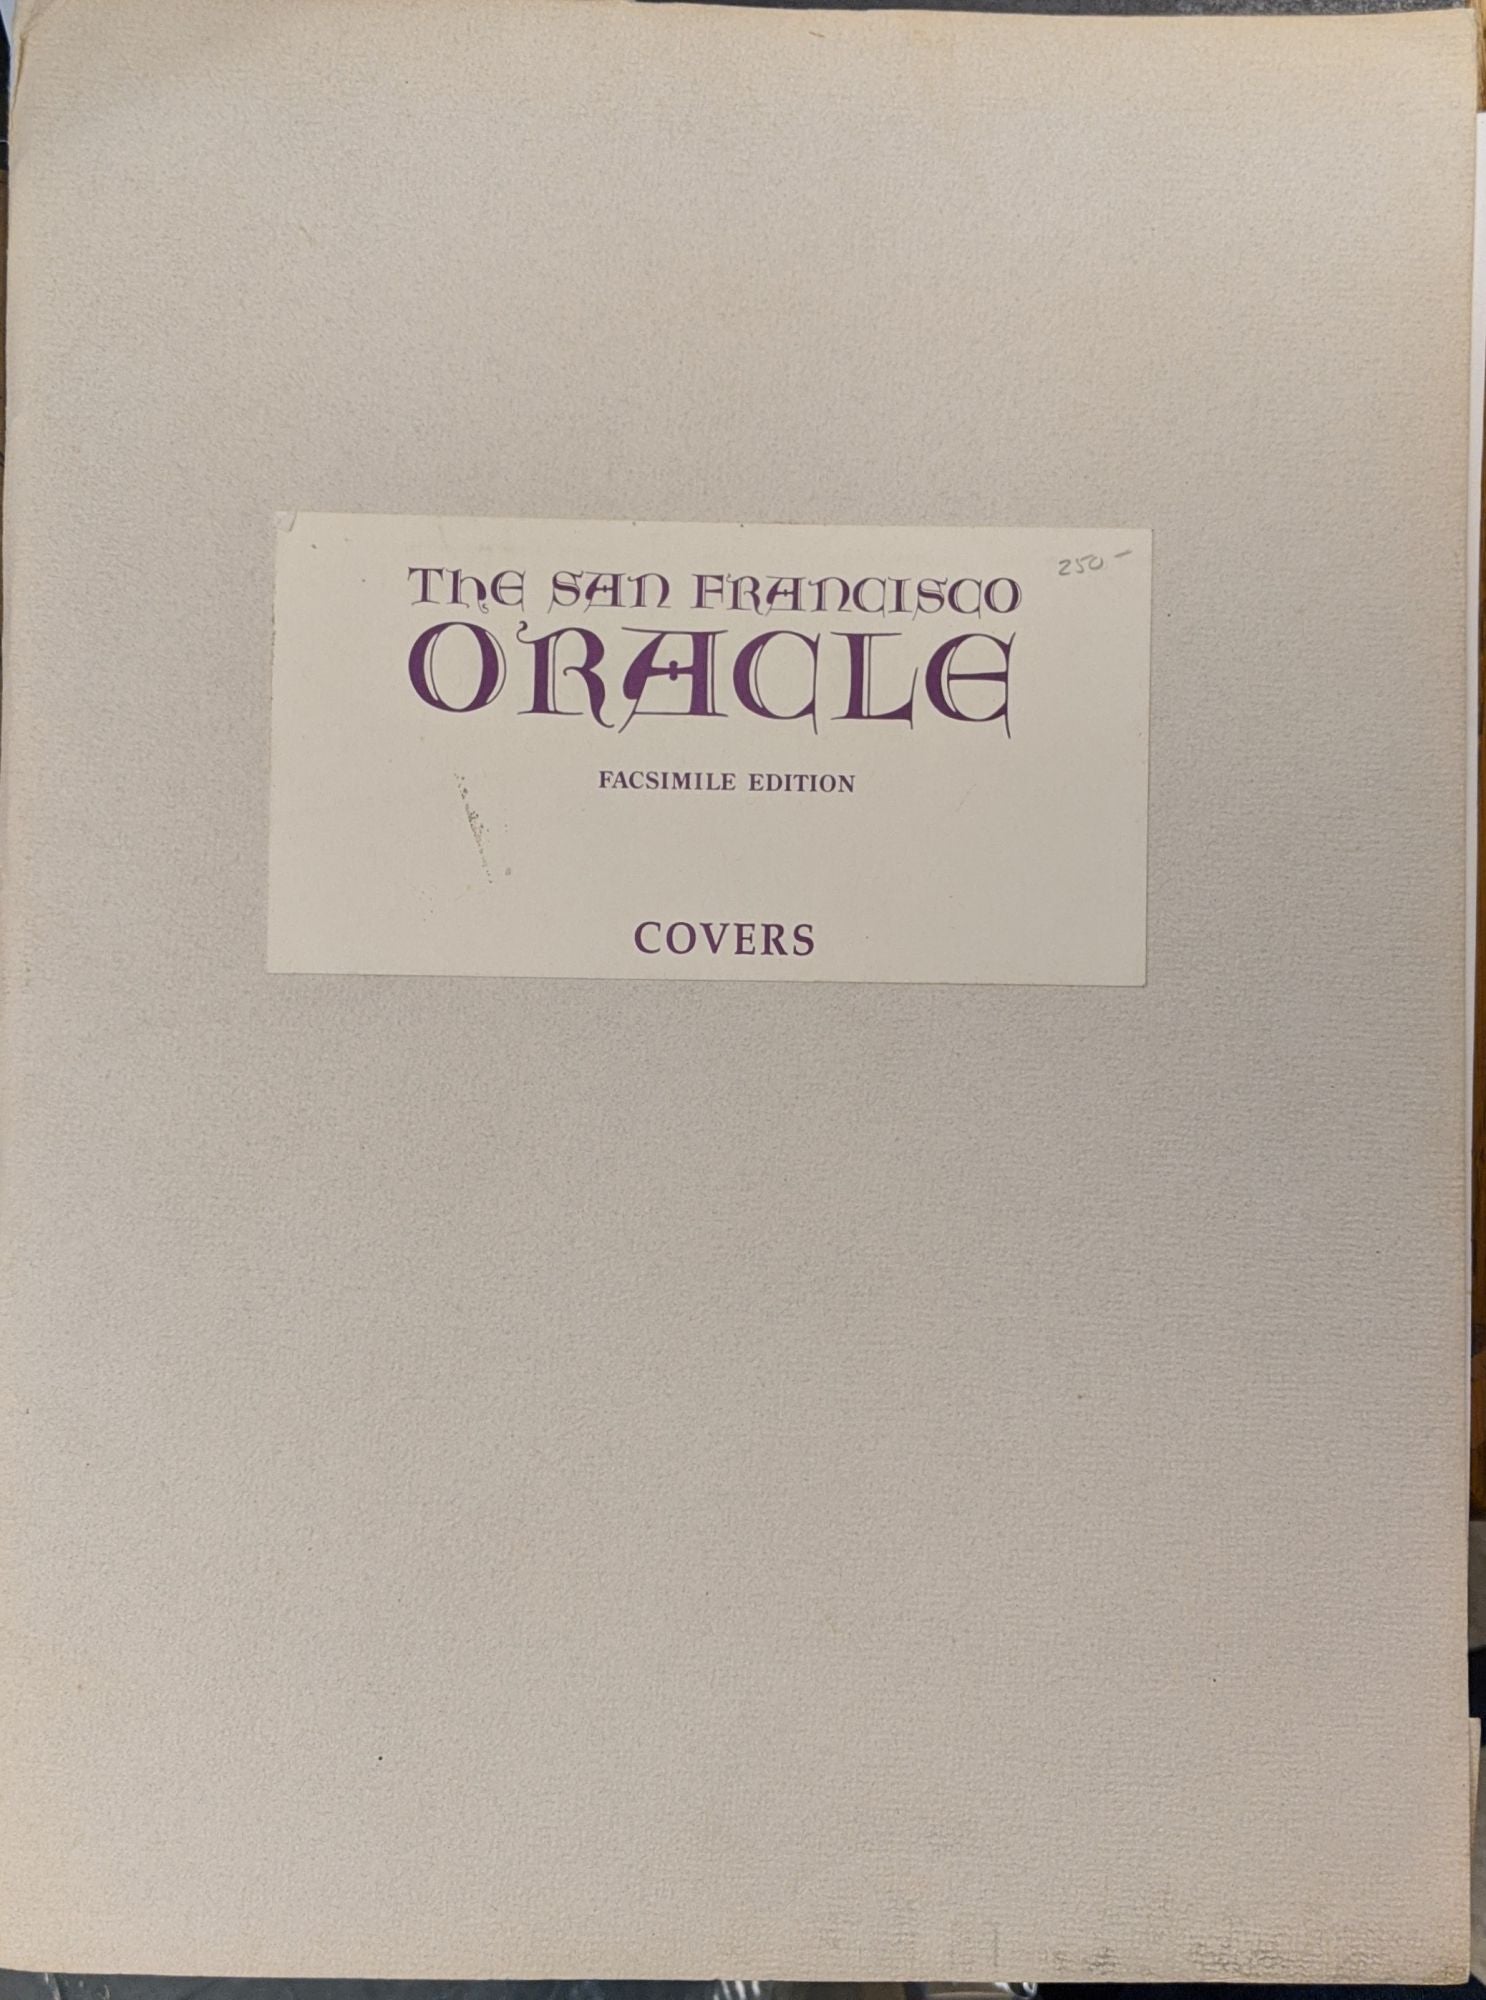 The San Francisco Oracle Facsimile Edition Covers by Allen Cohen on Moe's  Books